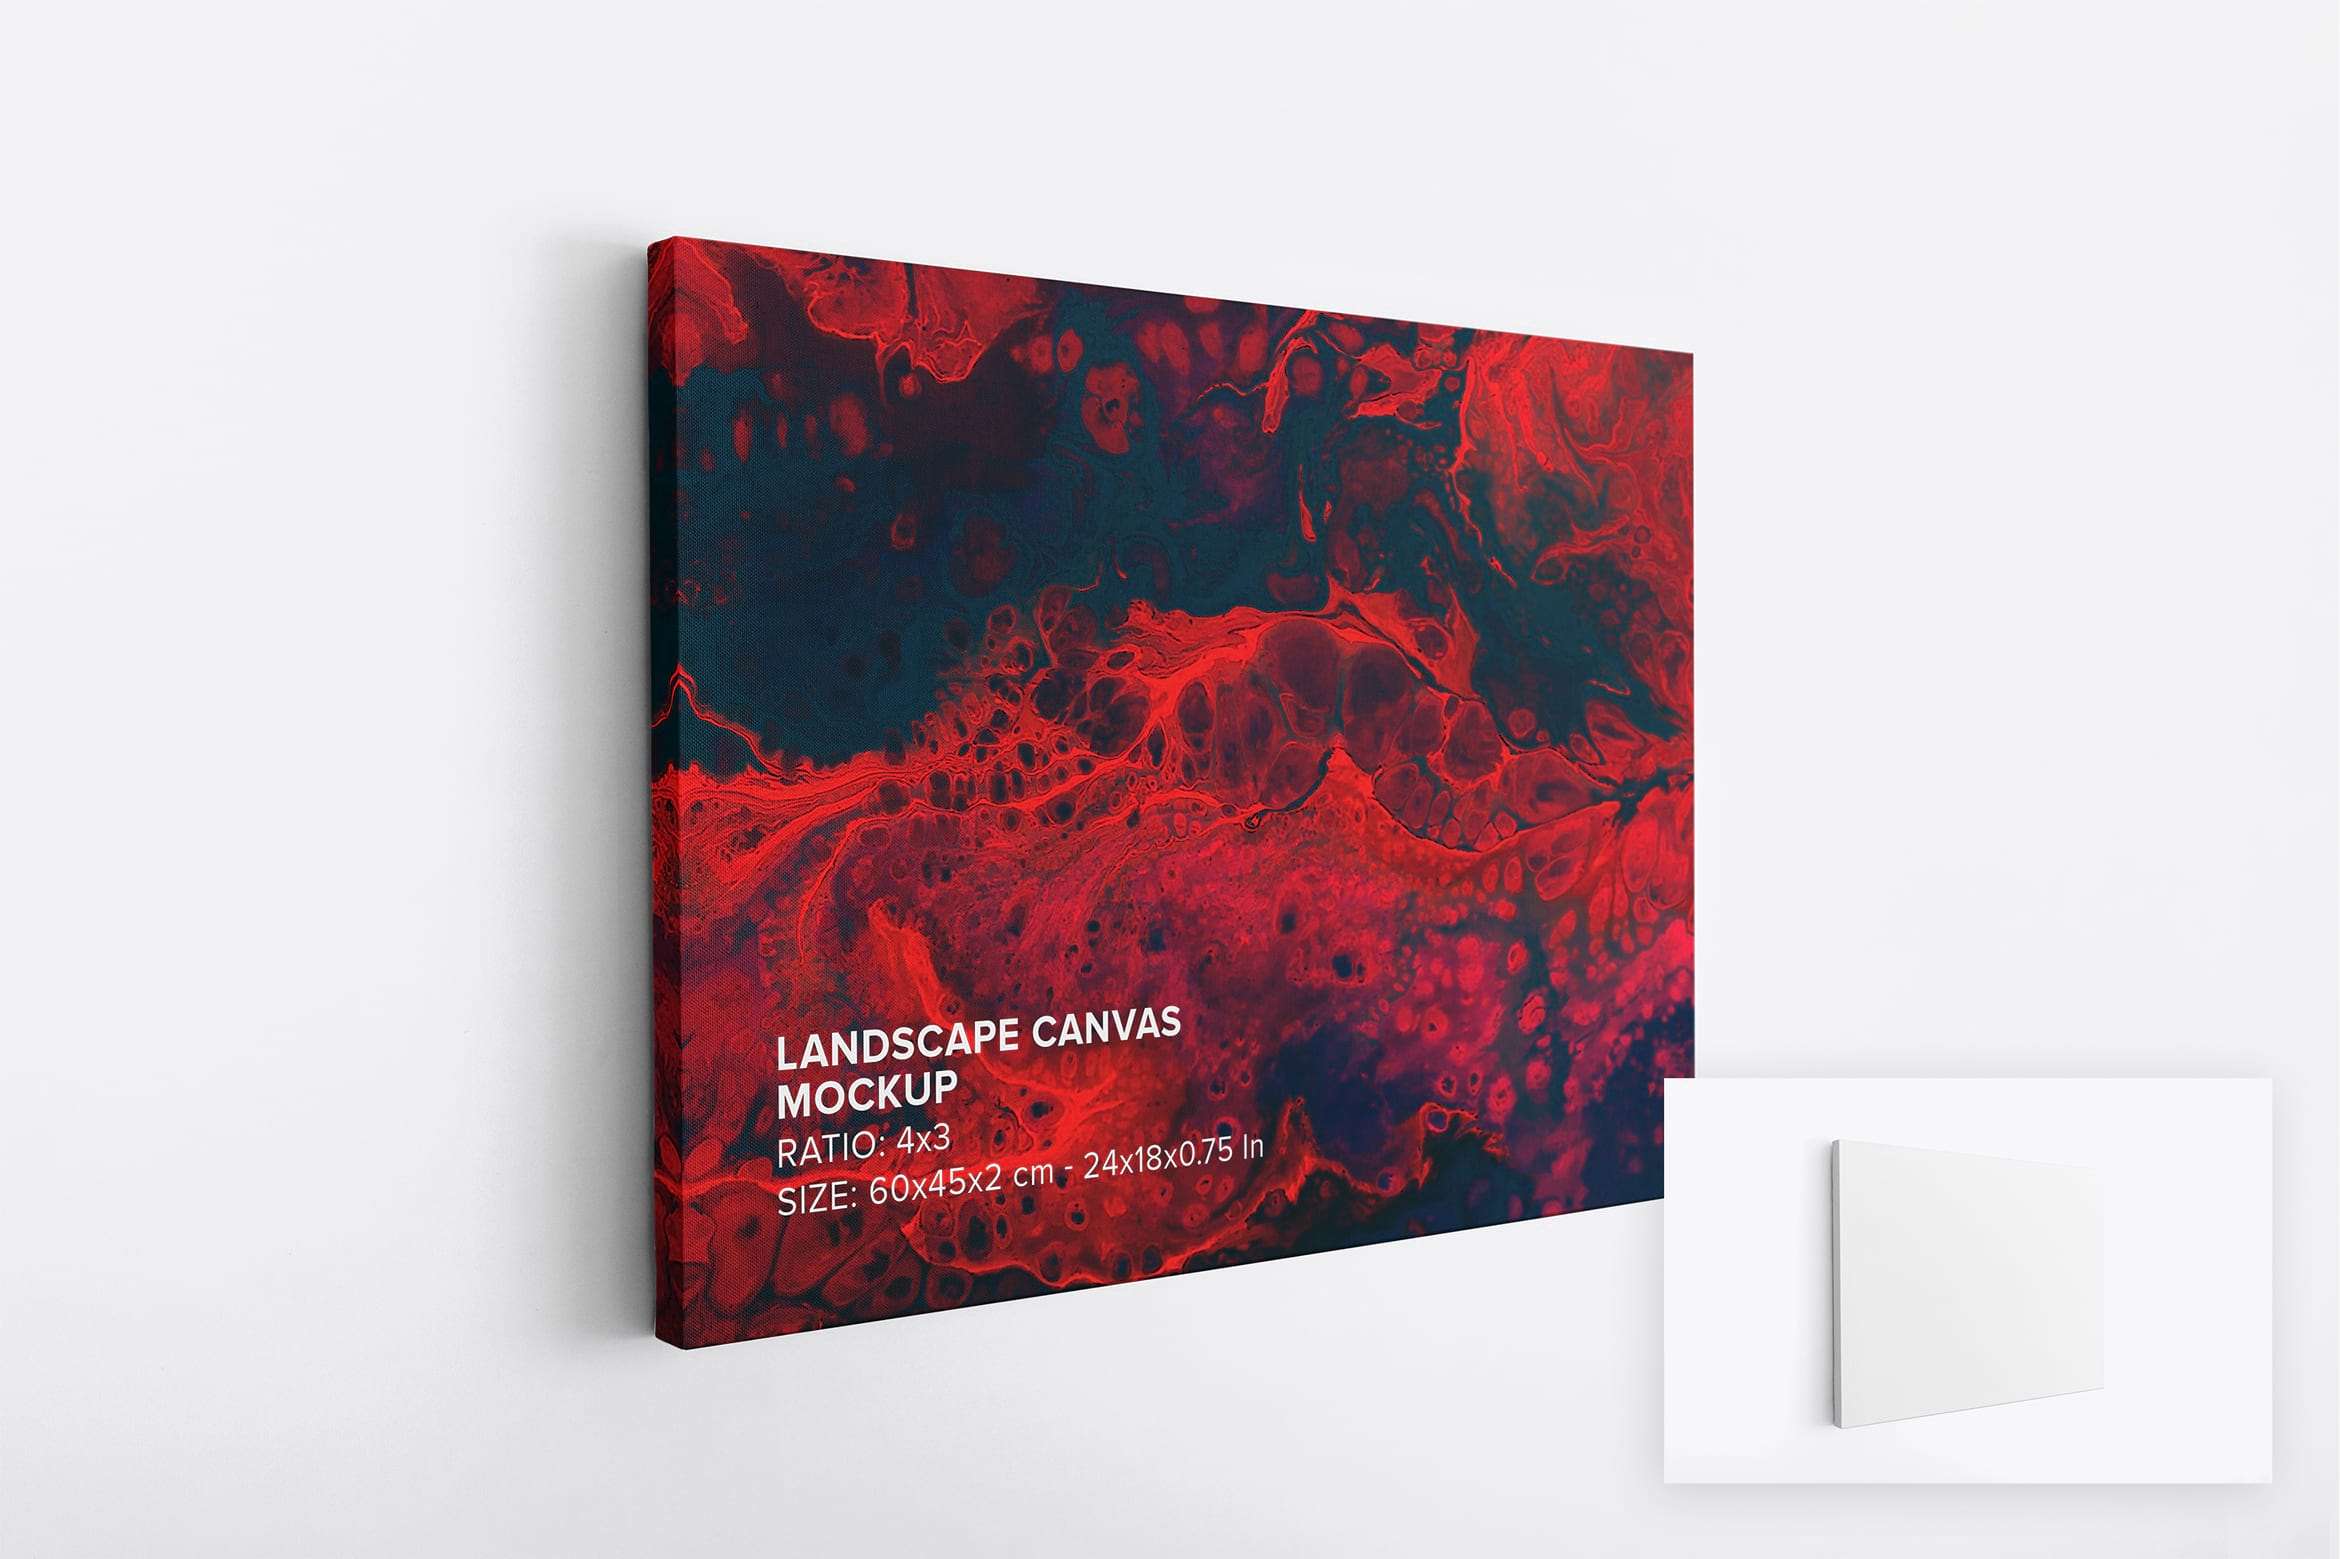 Art Wall Landscape Canvas Ratio 4x3 Mockup - Left 0.75 in Wrap View